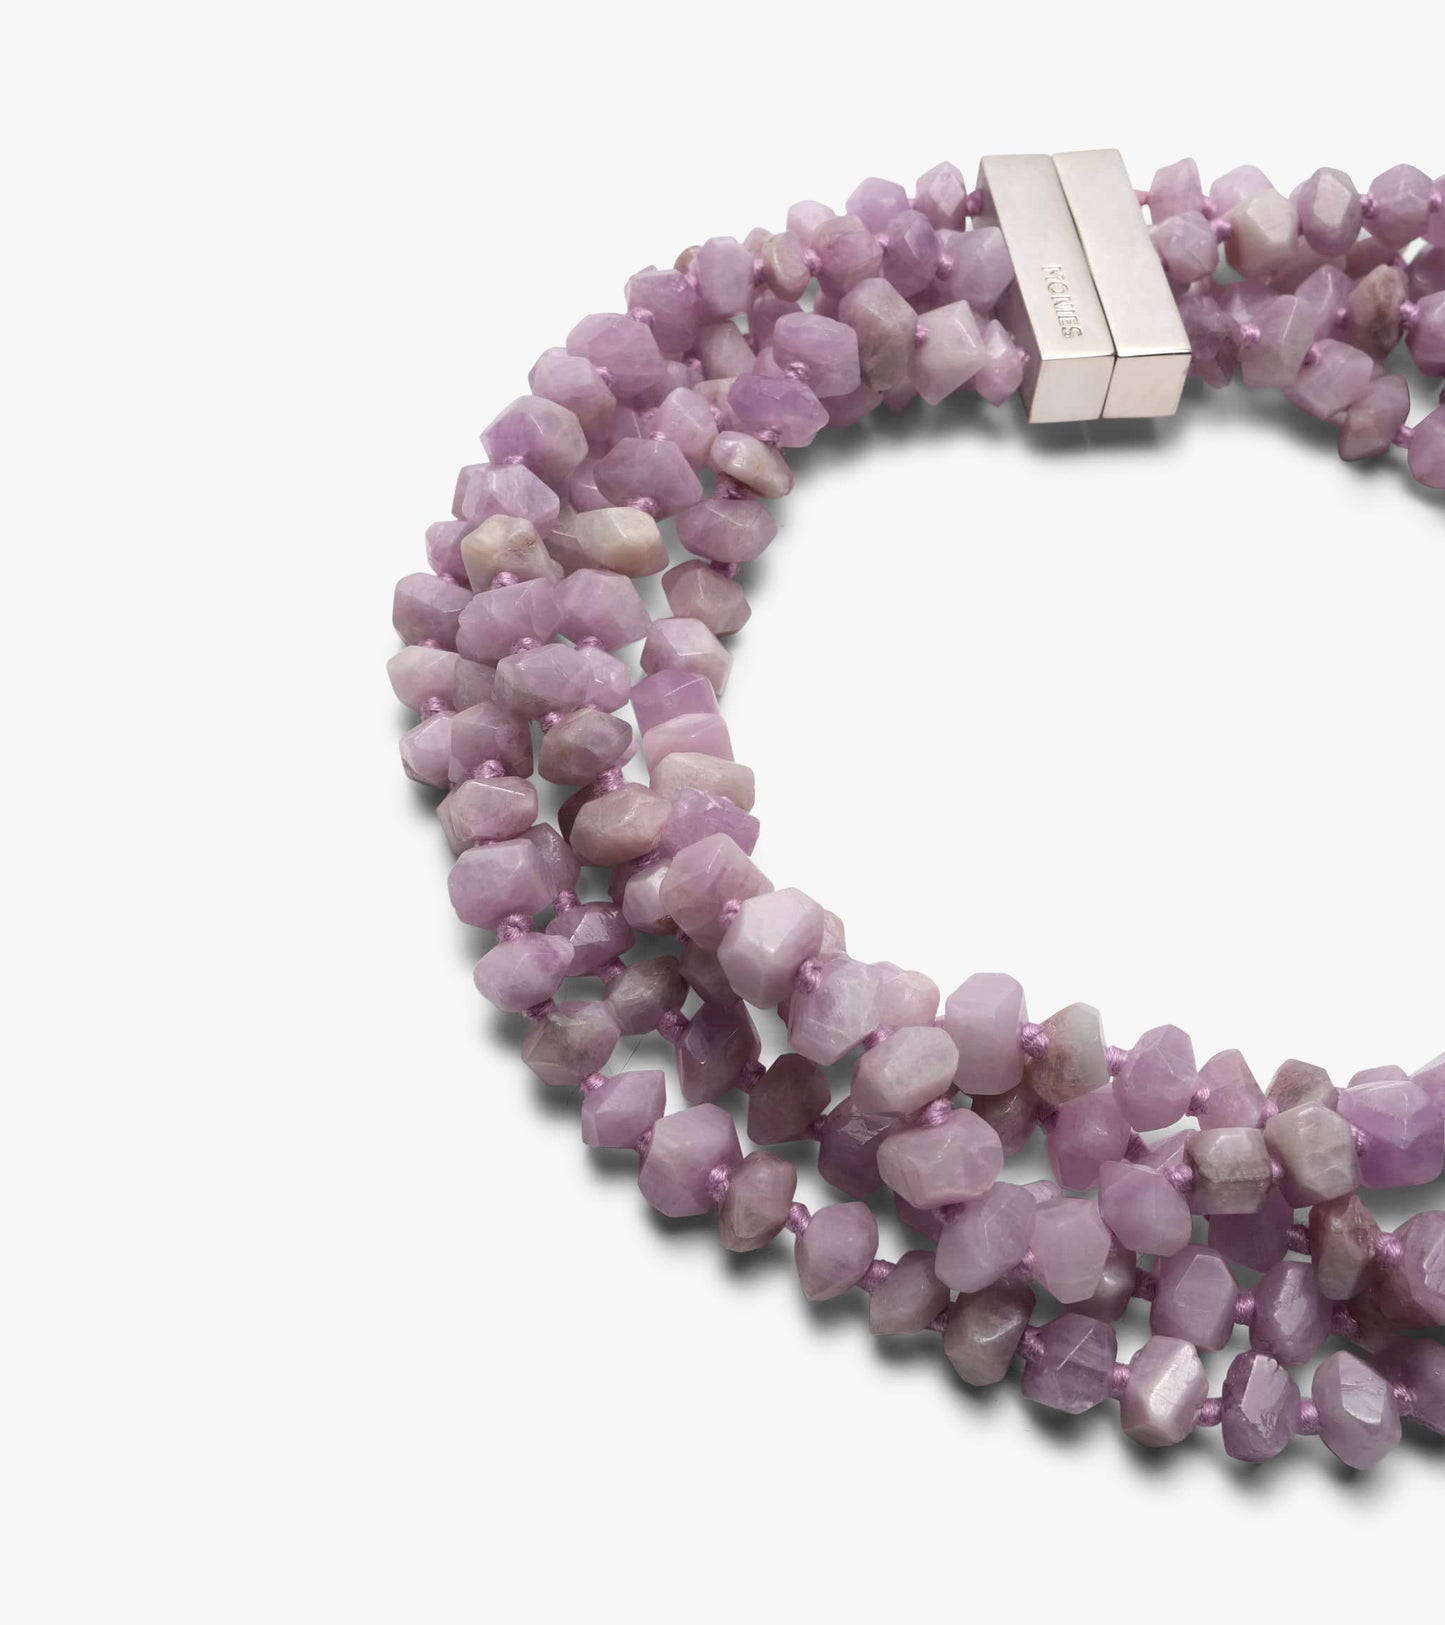 Necklace: silver and kunzite